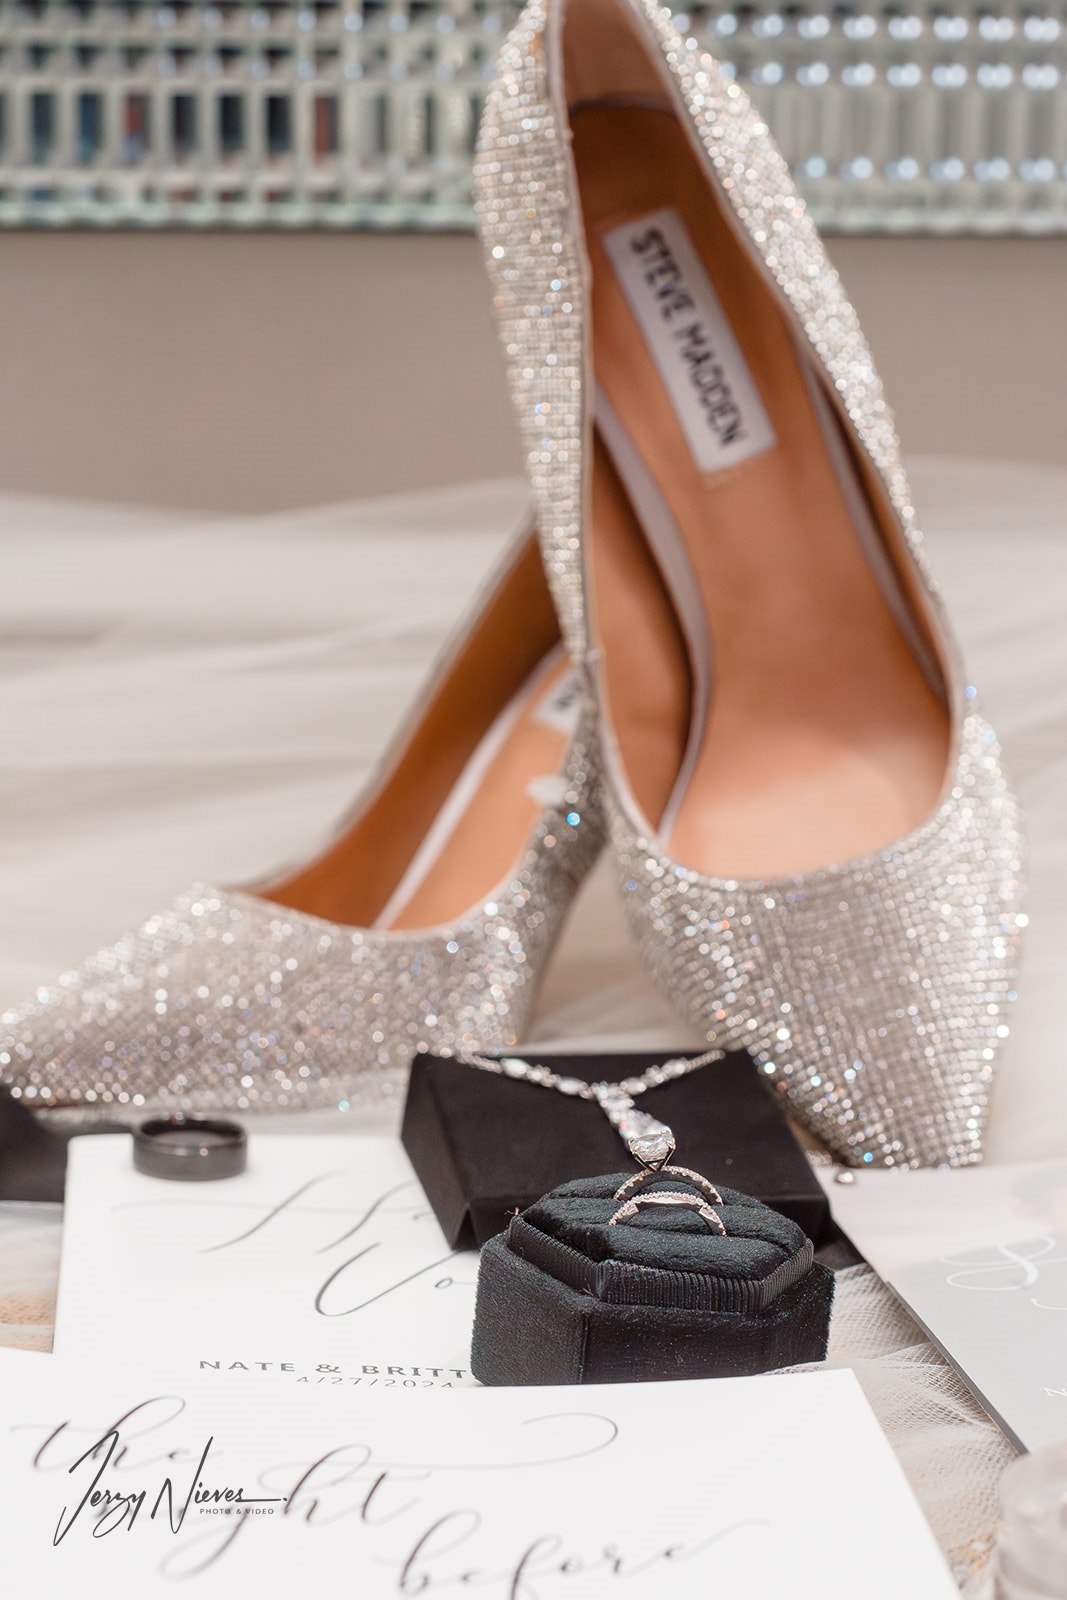 Close-up shot of bride Brittany's Steve Madden heels, wedding rings, and wedding invitations.